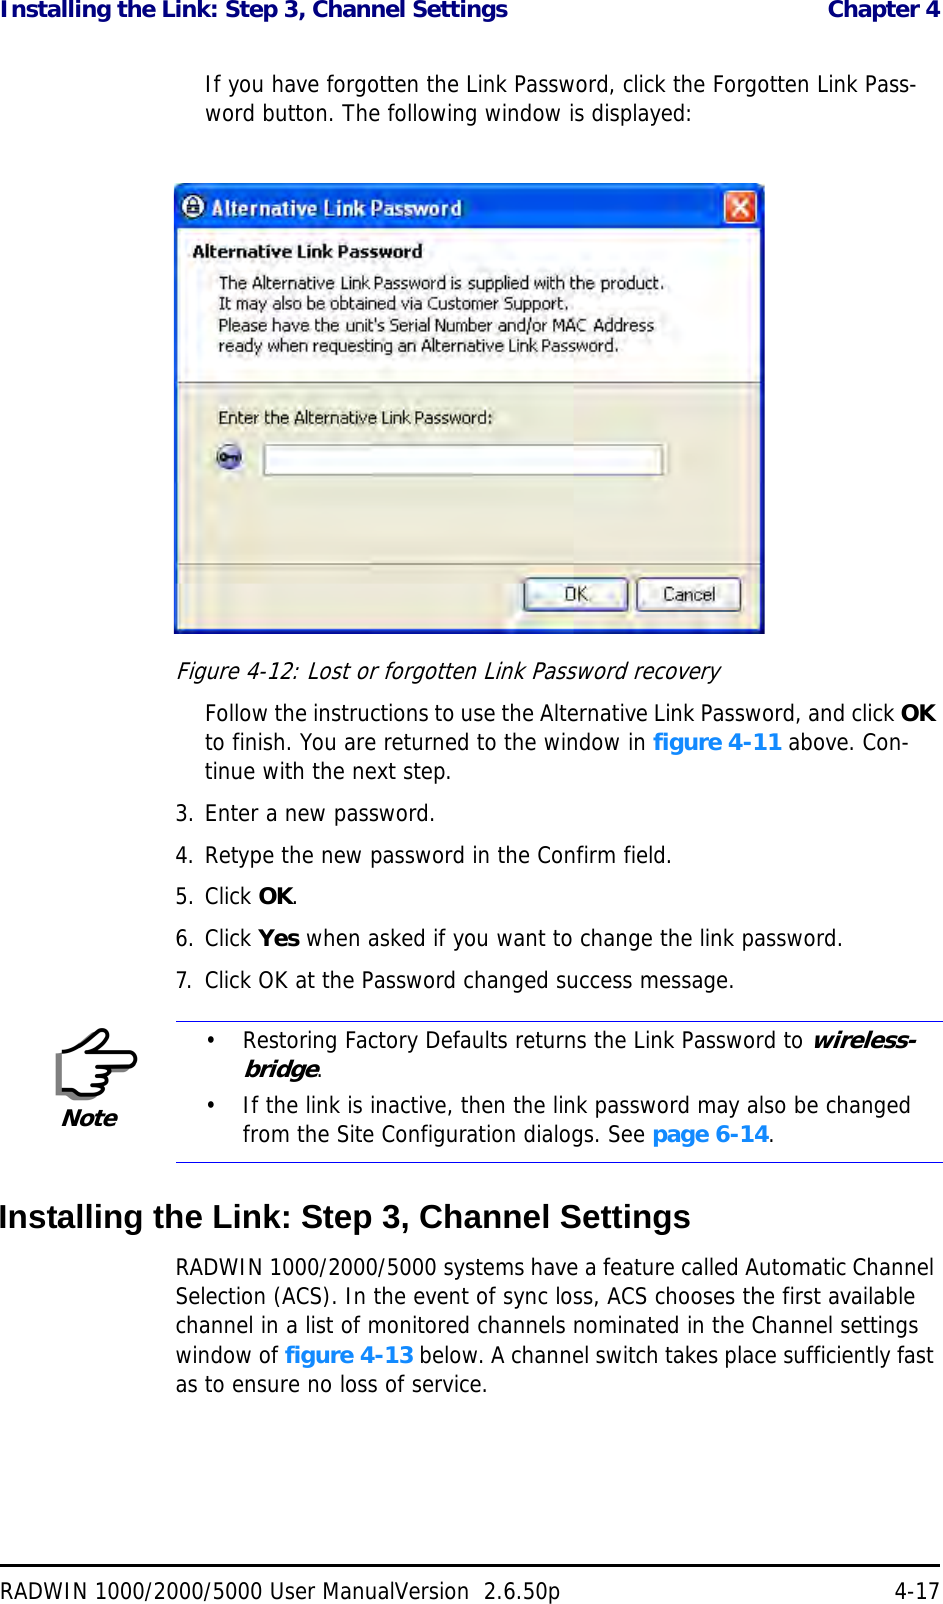 Installing the Link: Step 3, Channel Settings  Chapter 4RADWIN 1000/2000/5000 User ManualVersion  2.6.50p 4-17If you have forgotten the Link Password, click the Forgotten Link Pass-word button. The following window is displayed:Figure 4-12: Lost or forgotten Link Password recoveryFollow the instructions to use the Alternative Link Password, and click OK to finish. You are returned to the window in figure 4-11 above. Con-tinue with the next step.3. Enter a new password.4. Retype the new password in the Confirm field.5. Click OK.6. Click Yes when asked if you want to change the link password.7. Click OK at the Password changed success message.Installing the Link: Step 3, Channel SettingsRADWIN 1000/2000/5000 systems have a feature called Automatic Channel Selection (ACS). In the event of sync loss, ACS chooses the first available channel in a list of monitored channels nominated in the Channel settings window of figure 4-13 below. A channel switch takes place sufficiently fast as to ensure no loss of service.Note• Restoring Factory Defaults returns the Link Password to wireless-bridge.• If the link is inactive, then the link password may also be changed from the Site Configuration dialogs. See page 6-14.